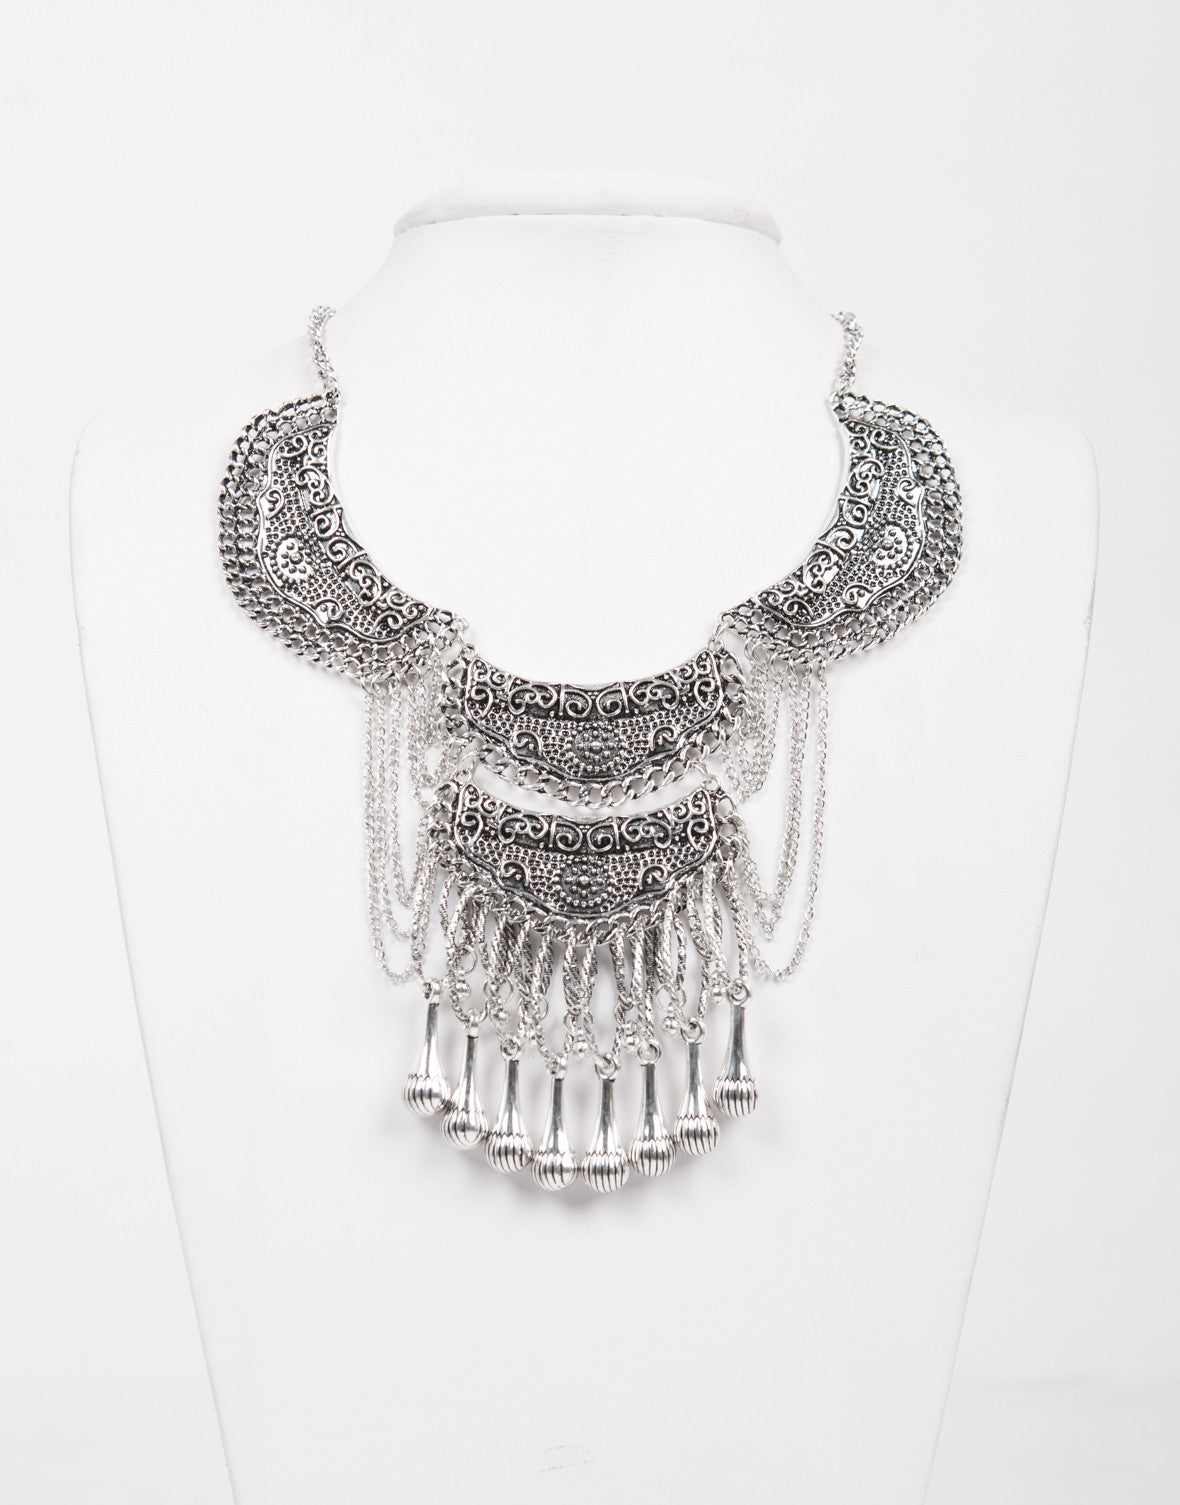 Detailed Chandelier Necklace - Silver Necklace - Statement Necklace ...